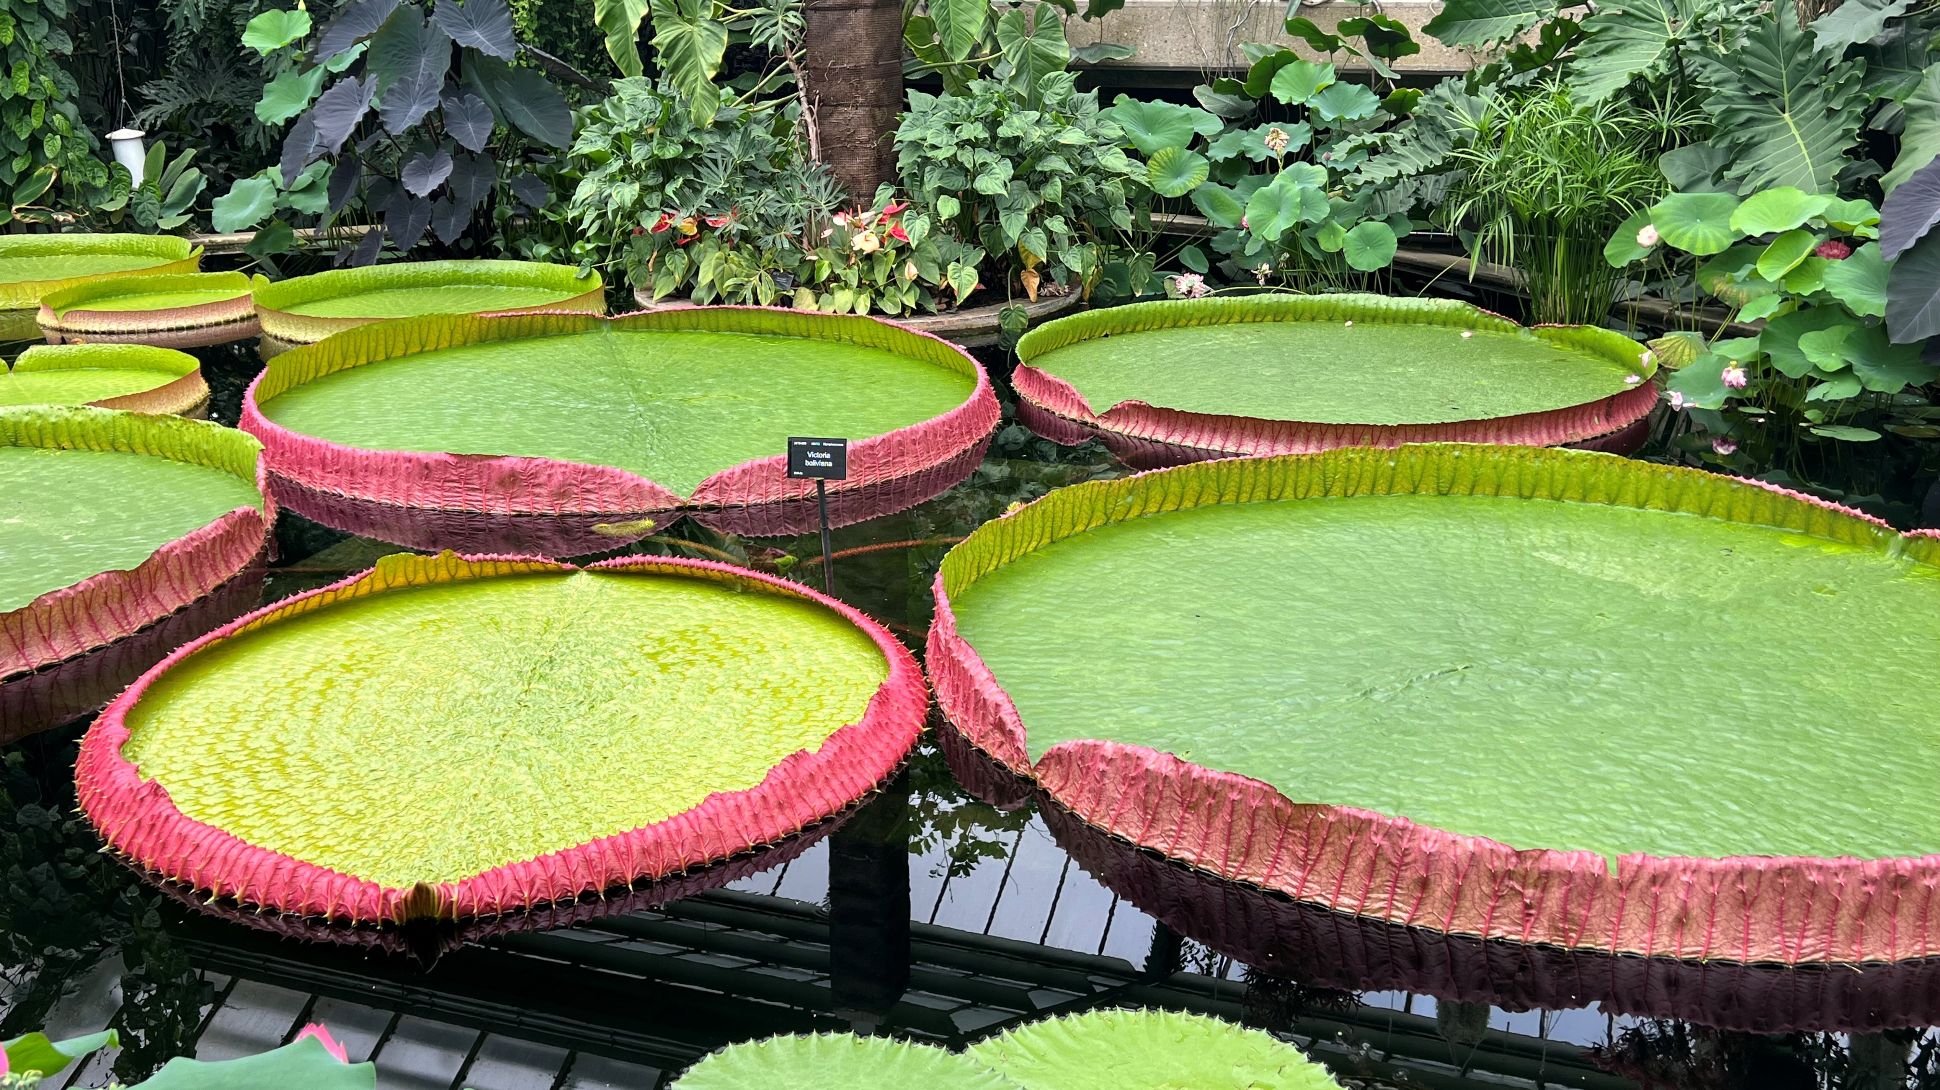 Several large green waterlilies on the surface of the water surrounded by other plants